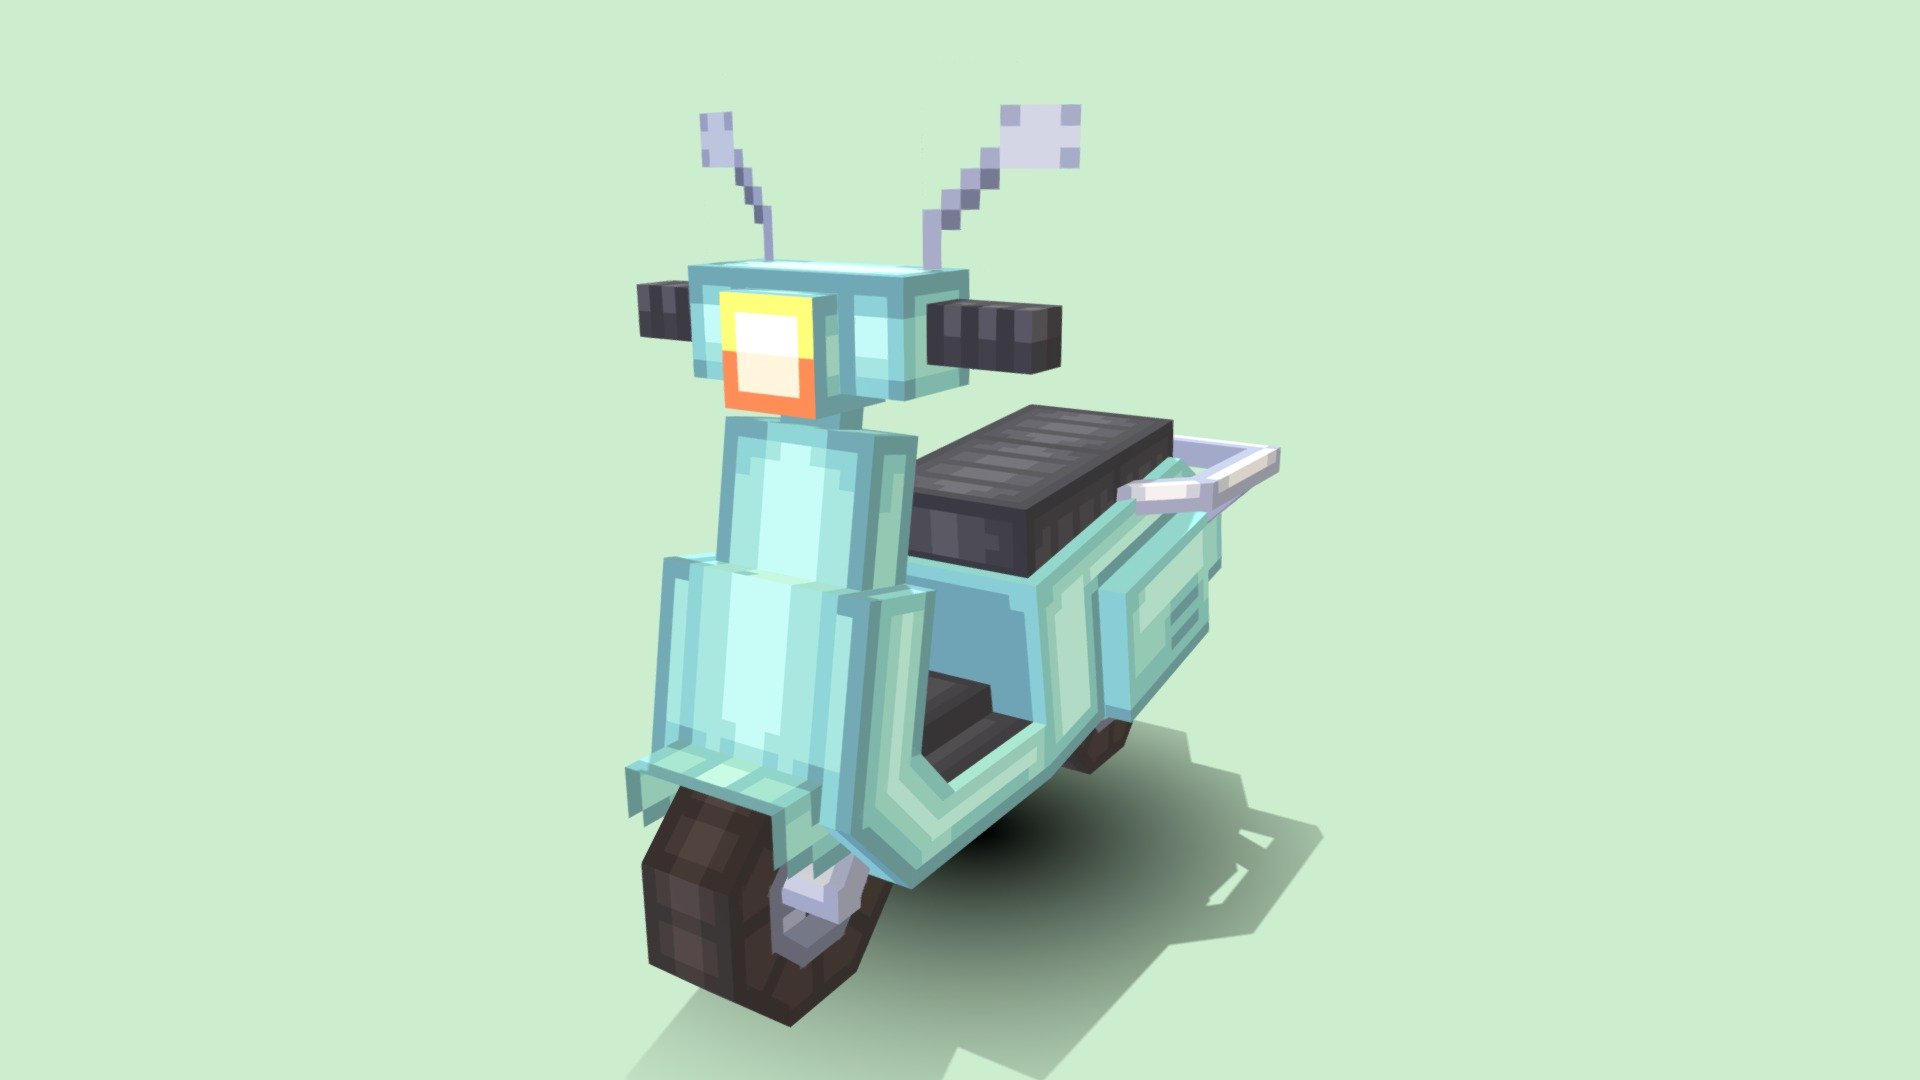 This is one of my latest 3D models made in blockbench. I hope you like it! - Scooter - 3D model by Fyrtarn (@ArtistFyrtarn) 3d model